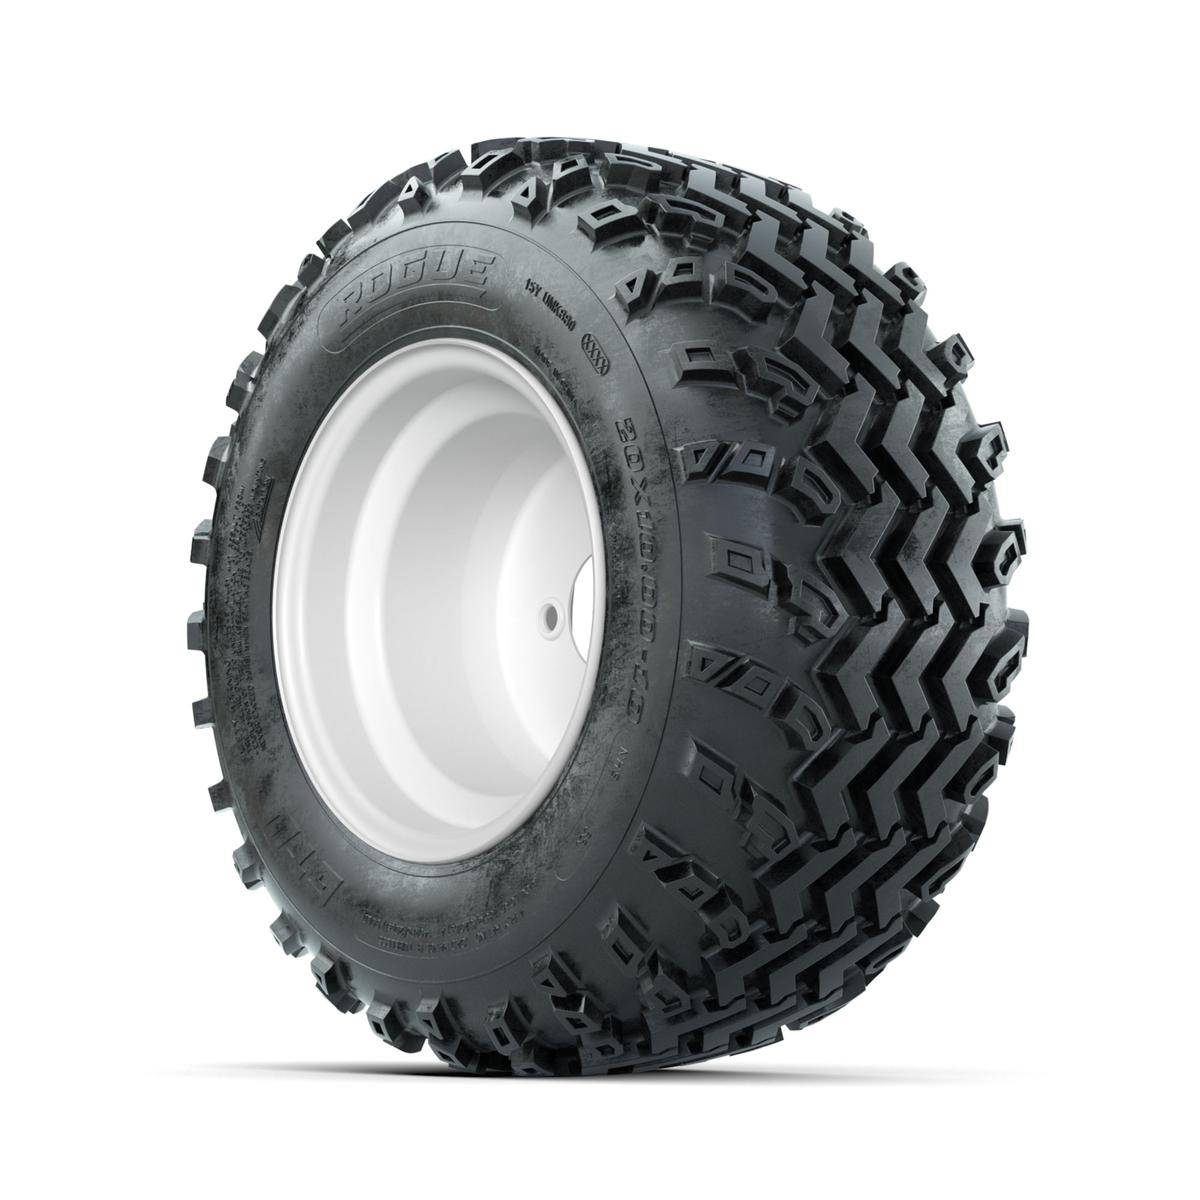 GTW Steel White 3:5 Offset 10 in Wheels with 20x10.00-10 Rogue All Terrain Tires – Full Set